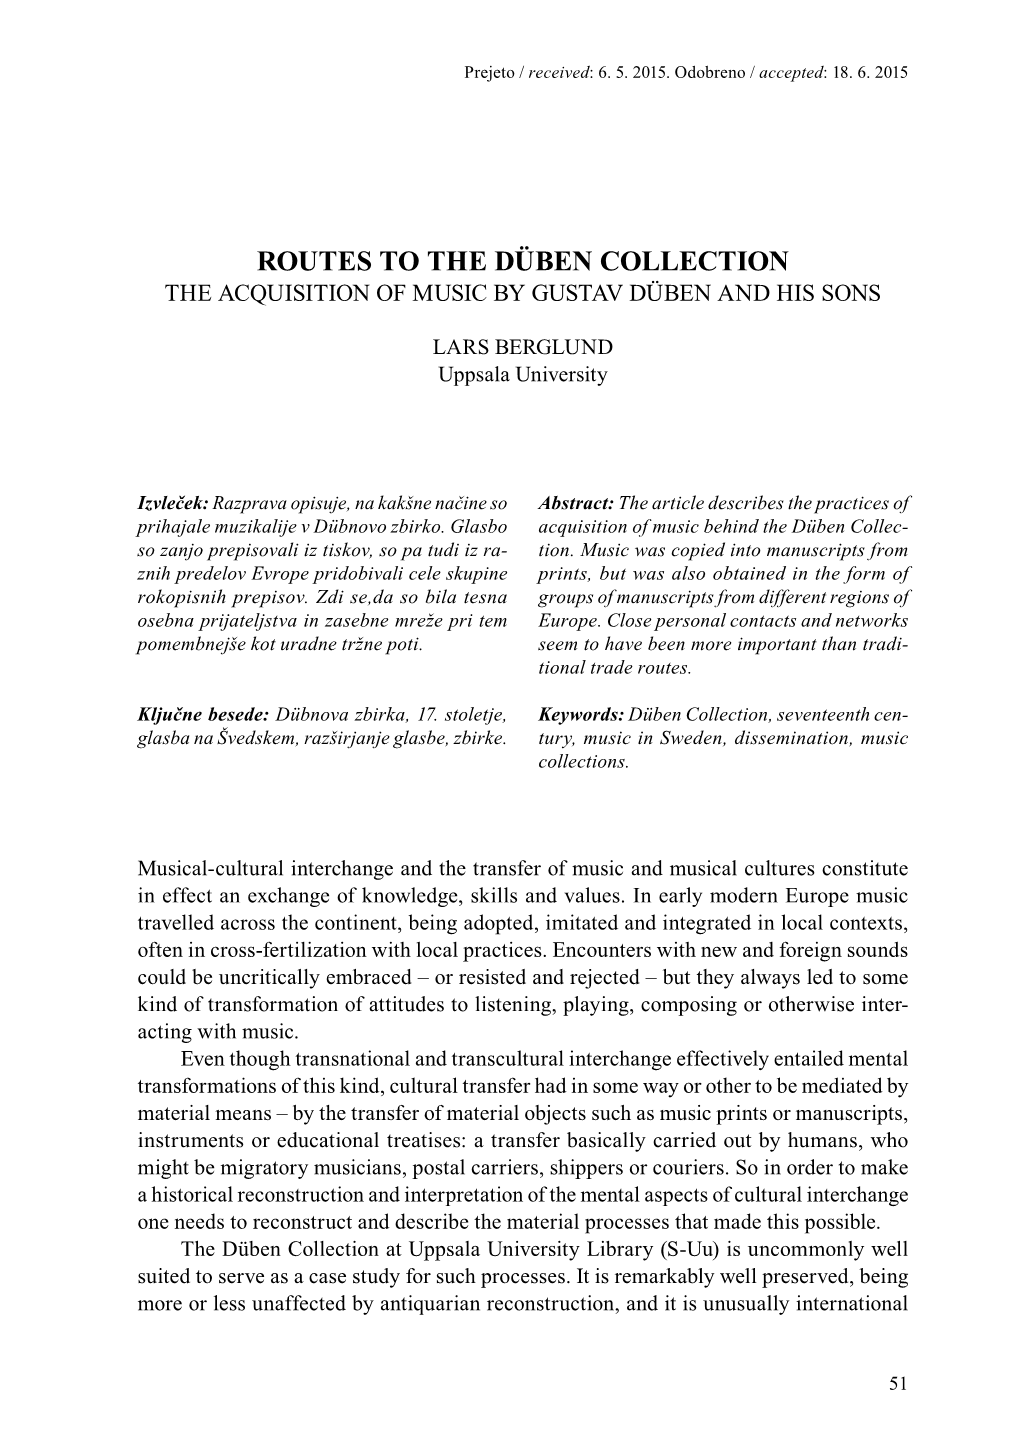 Routes to the Düben Collection the Acquisition of Music by Gustav Düben and His Sons